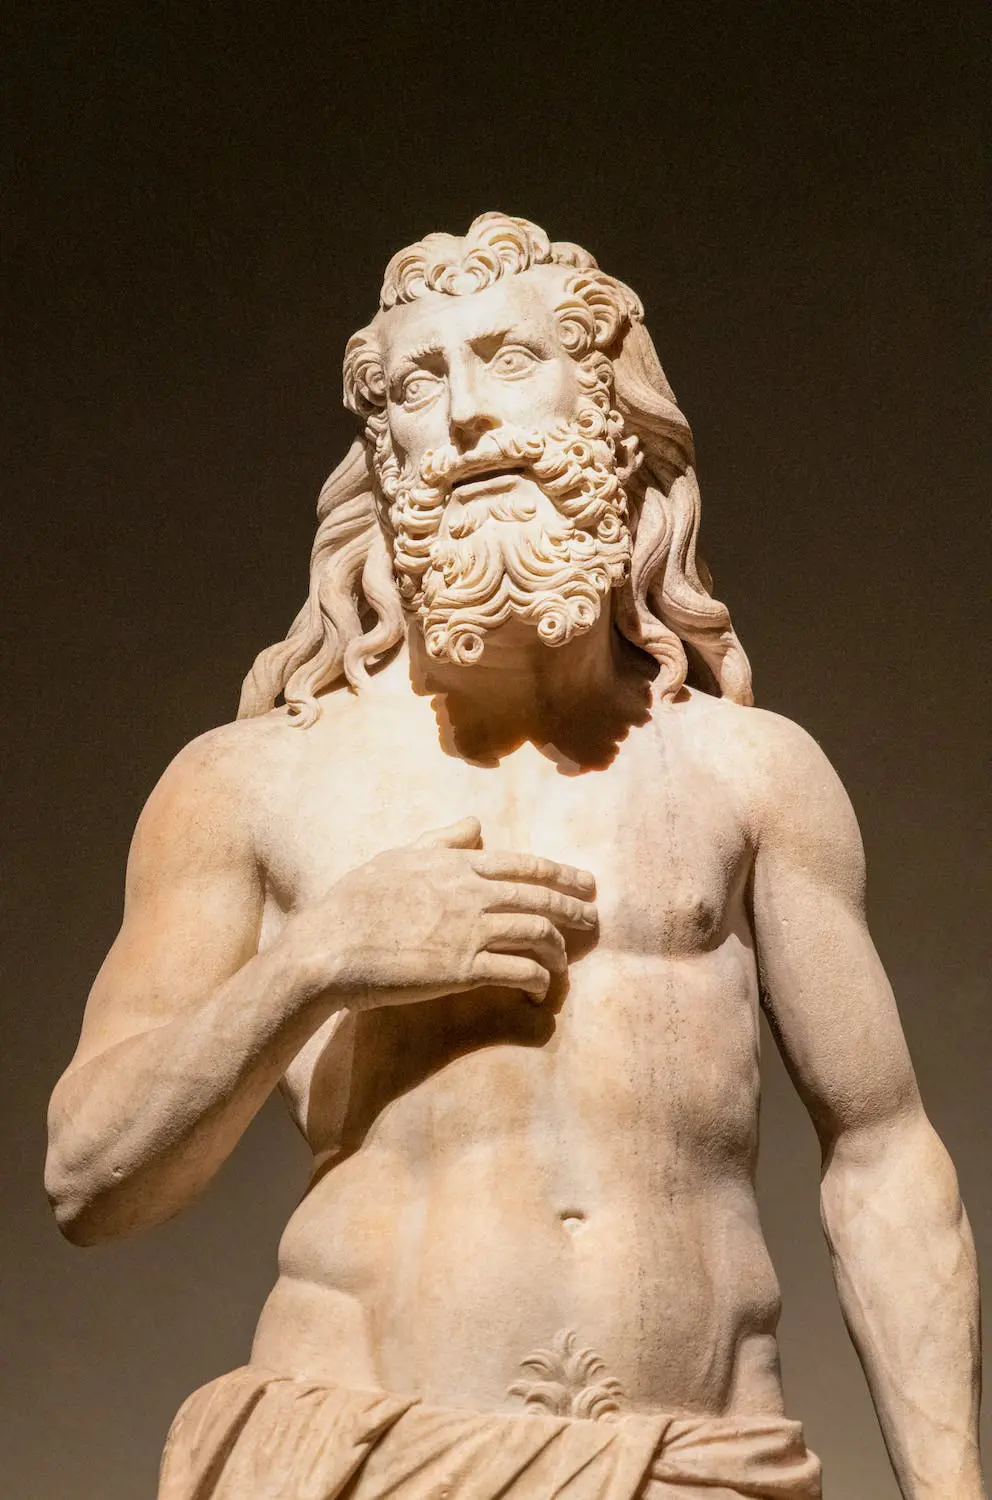 Zeus was the divine father of ancient Greek religion